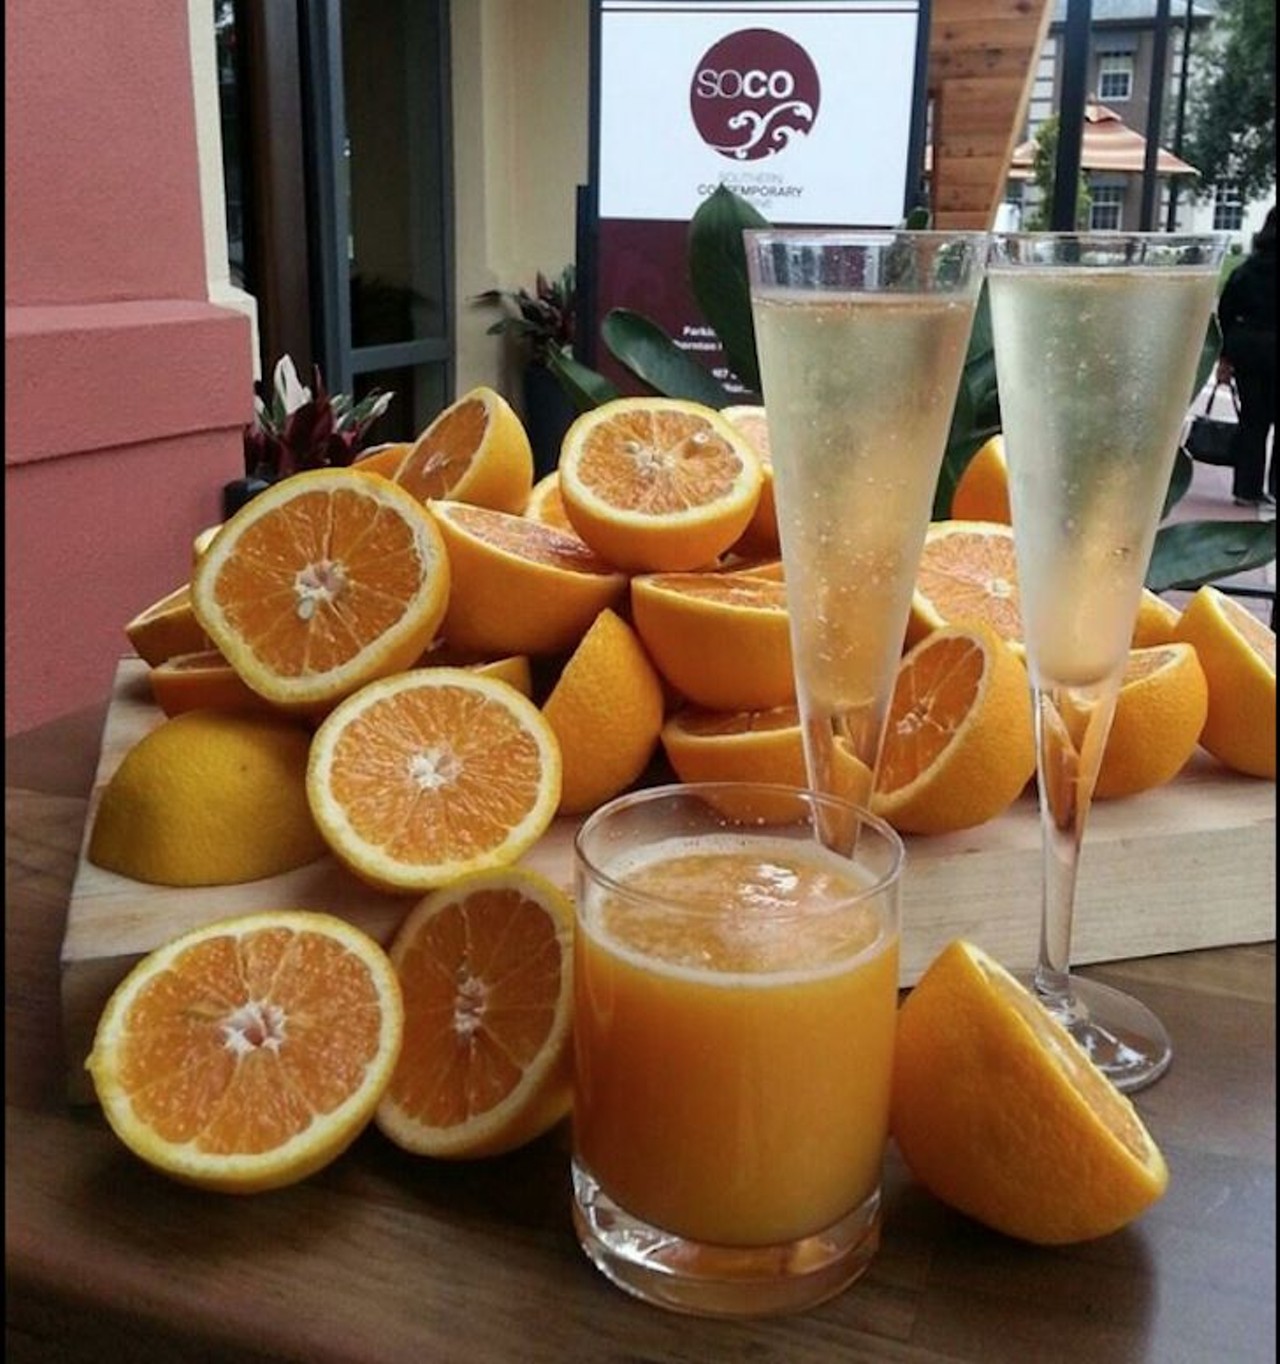 Coco Thornton Park  
629 E. Central Blvd., 407-849-1800
This Thornton Park spot is Southern meets contemporary style. Bottomless mimosas are $10 with brunch starting at 11 a.m.
Photo via Facebook/SOCO Thorton Park